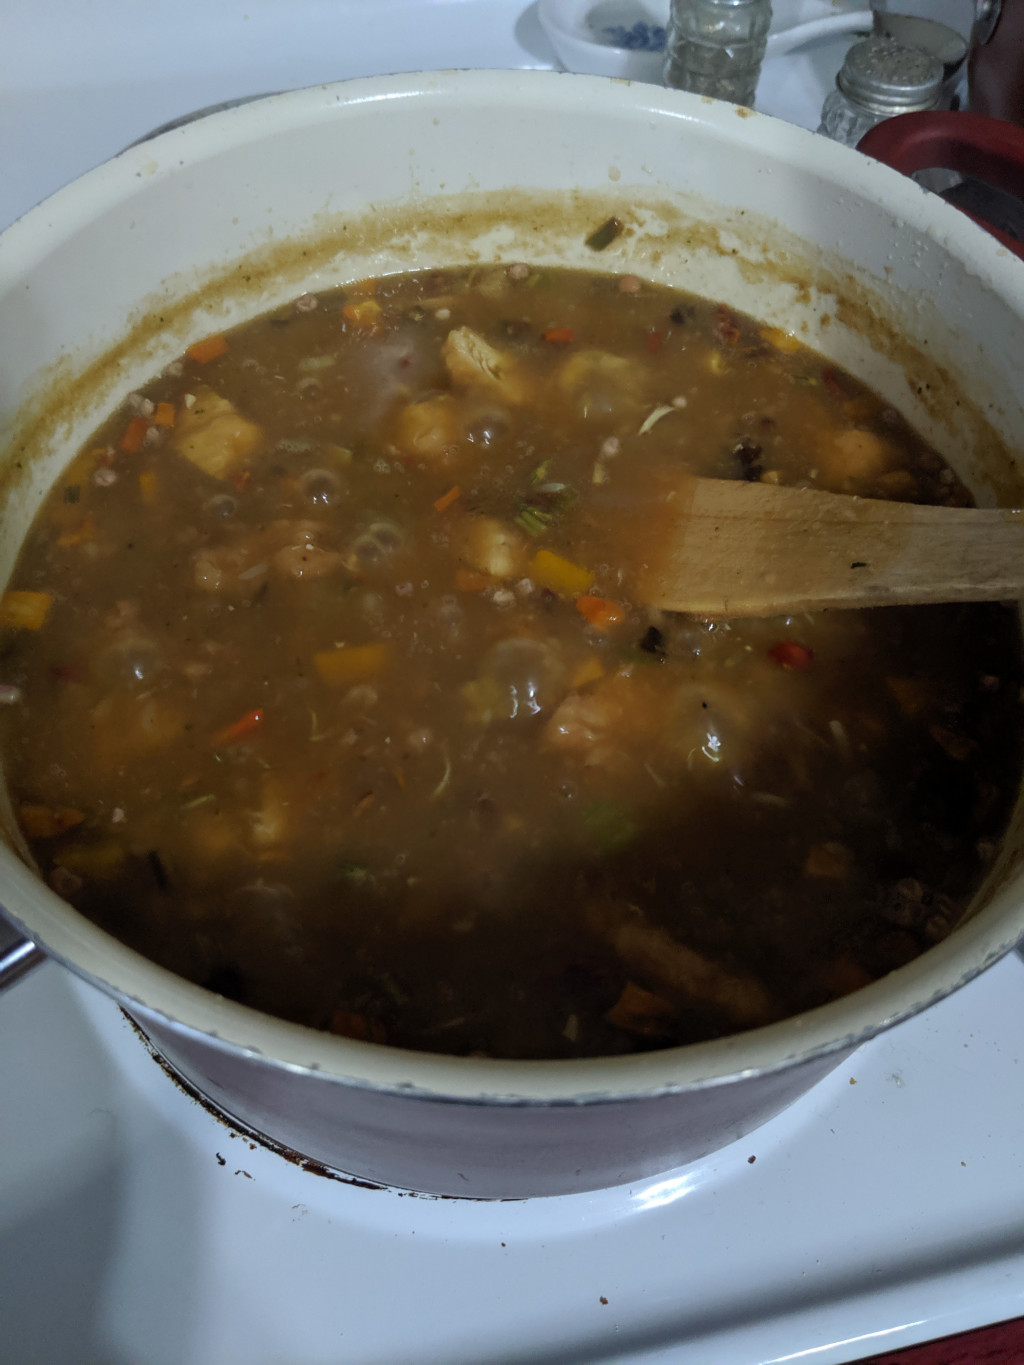 Download Gumbo Soup Mix With Leftover Chicken | HubPages